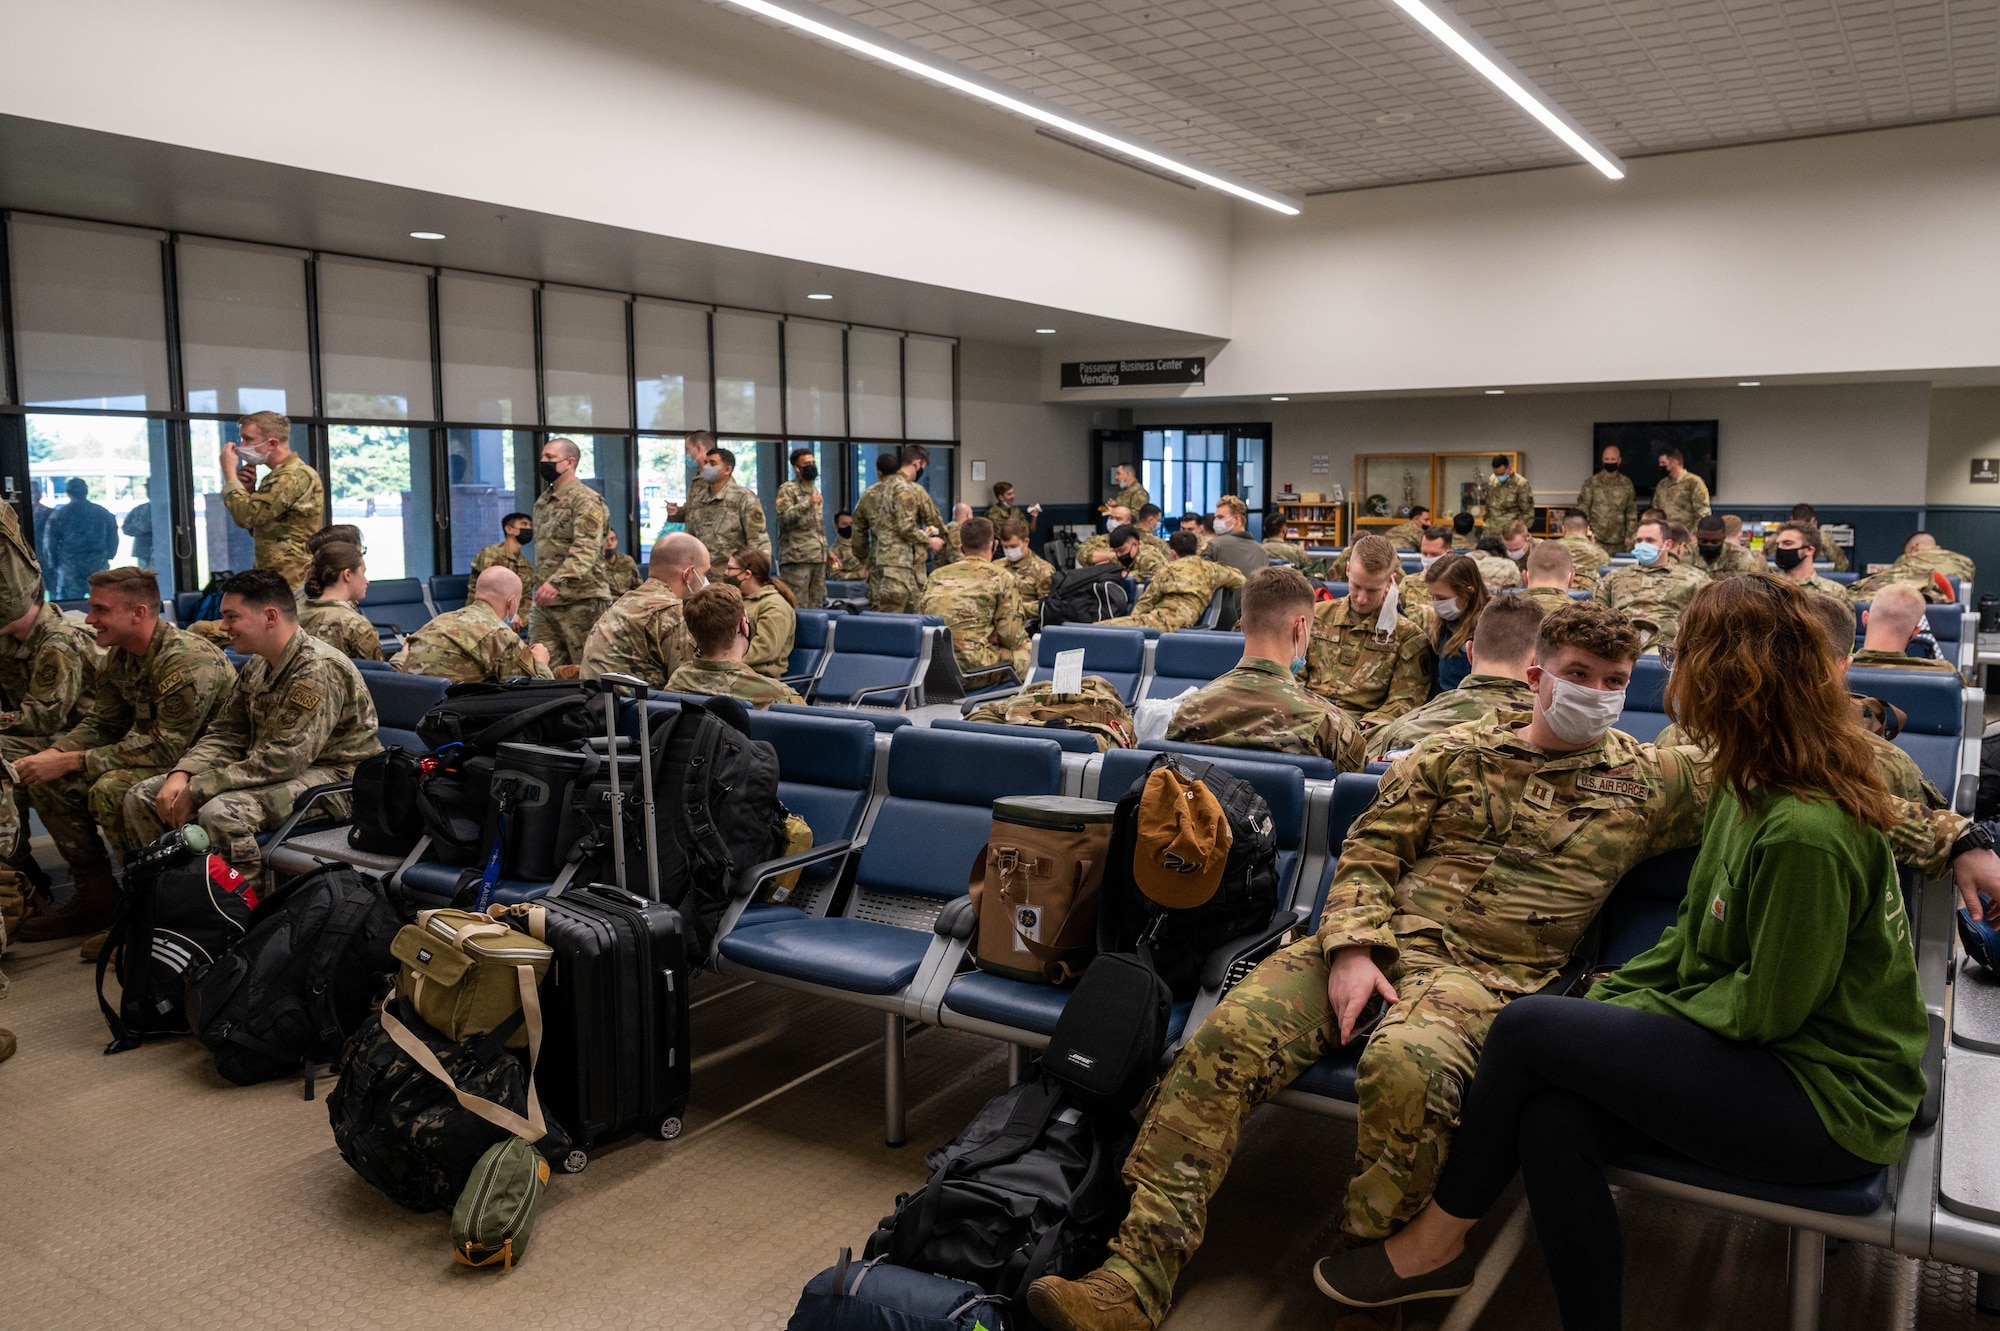 62d AW Airmen deploy in support of U.S. Central Command, U.S. European Command, U.S. Africa Command operations